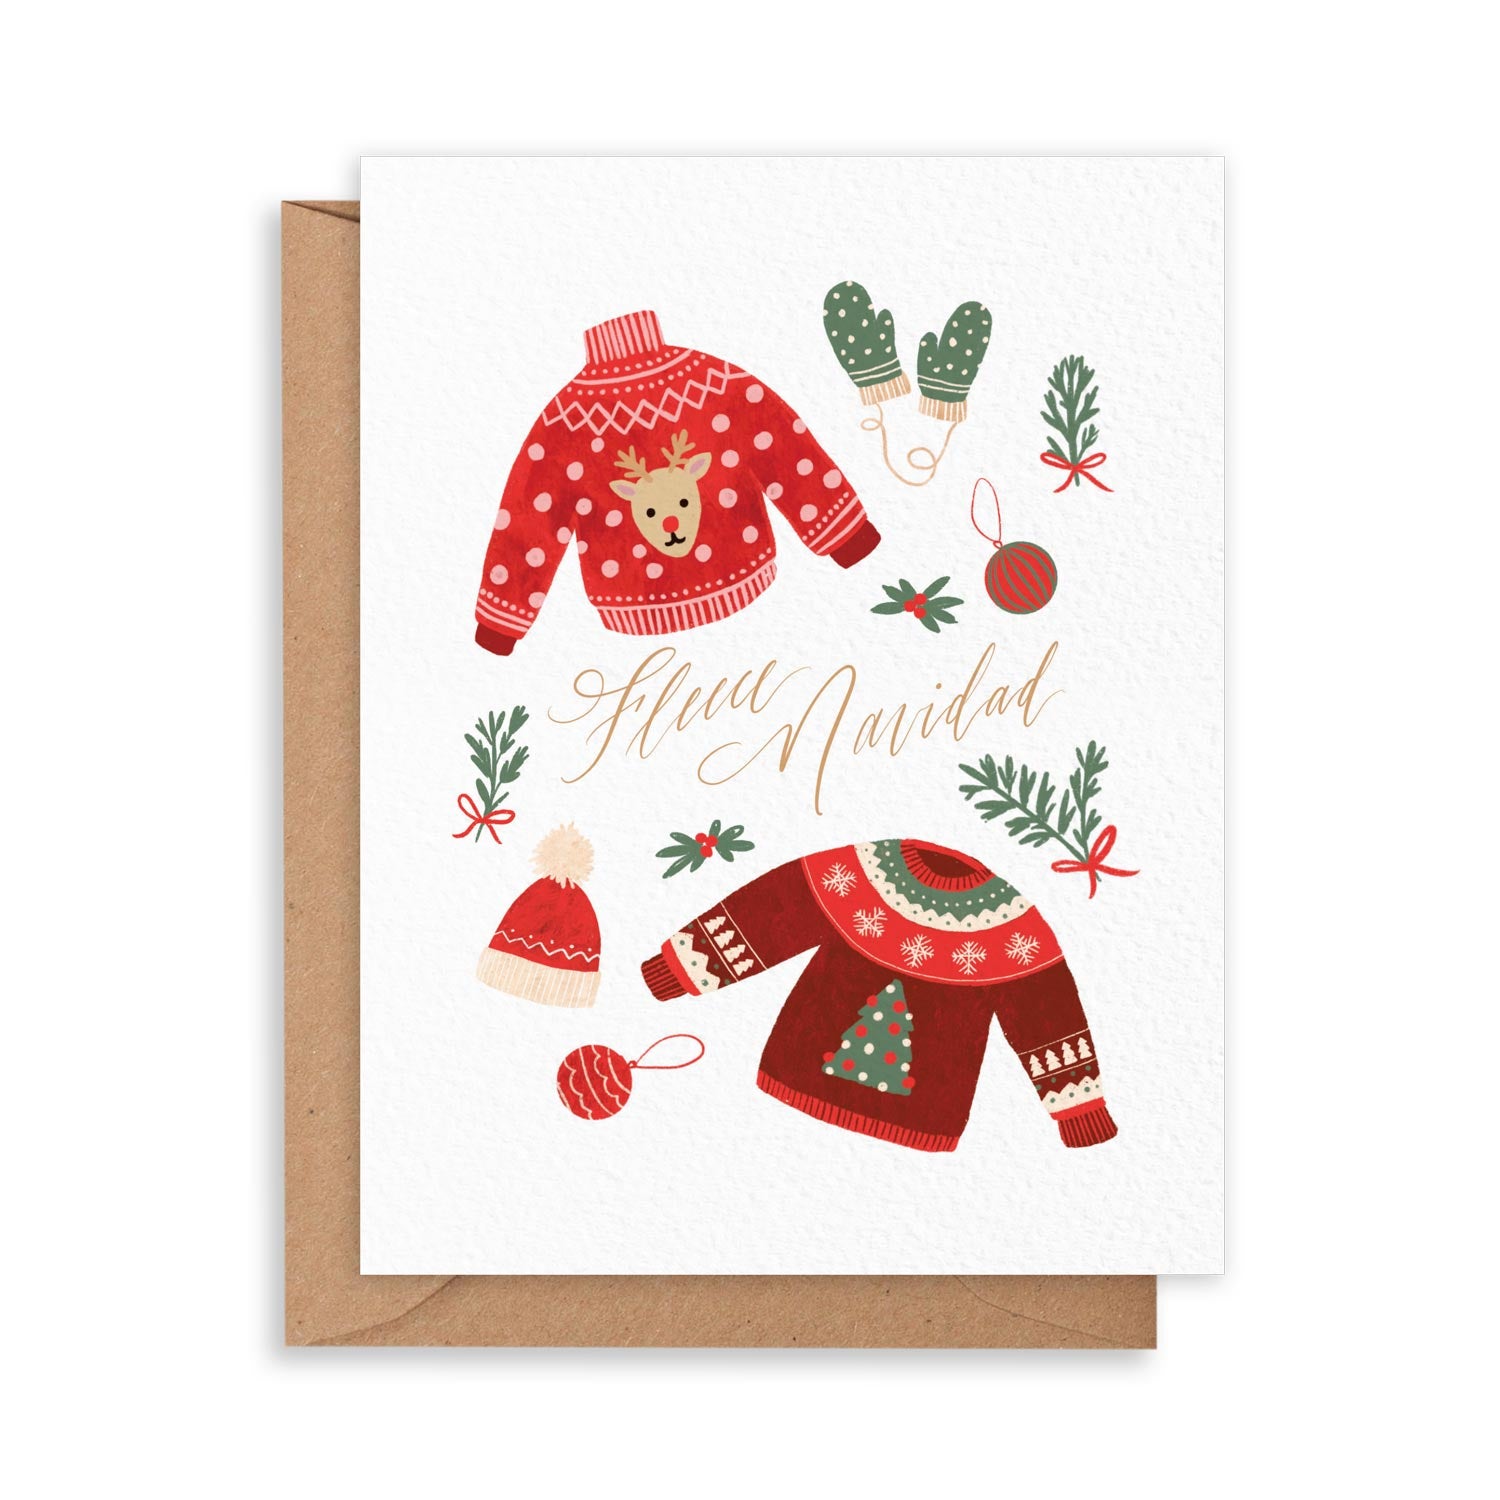 Card with Fuzzy sweaters with a reindeer and christmas tree along with mittens and toque, message 'Fleece Navidad'